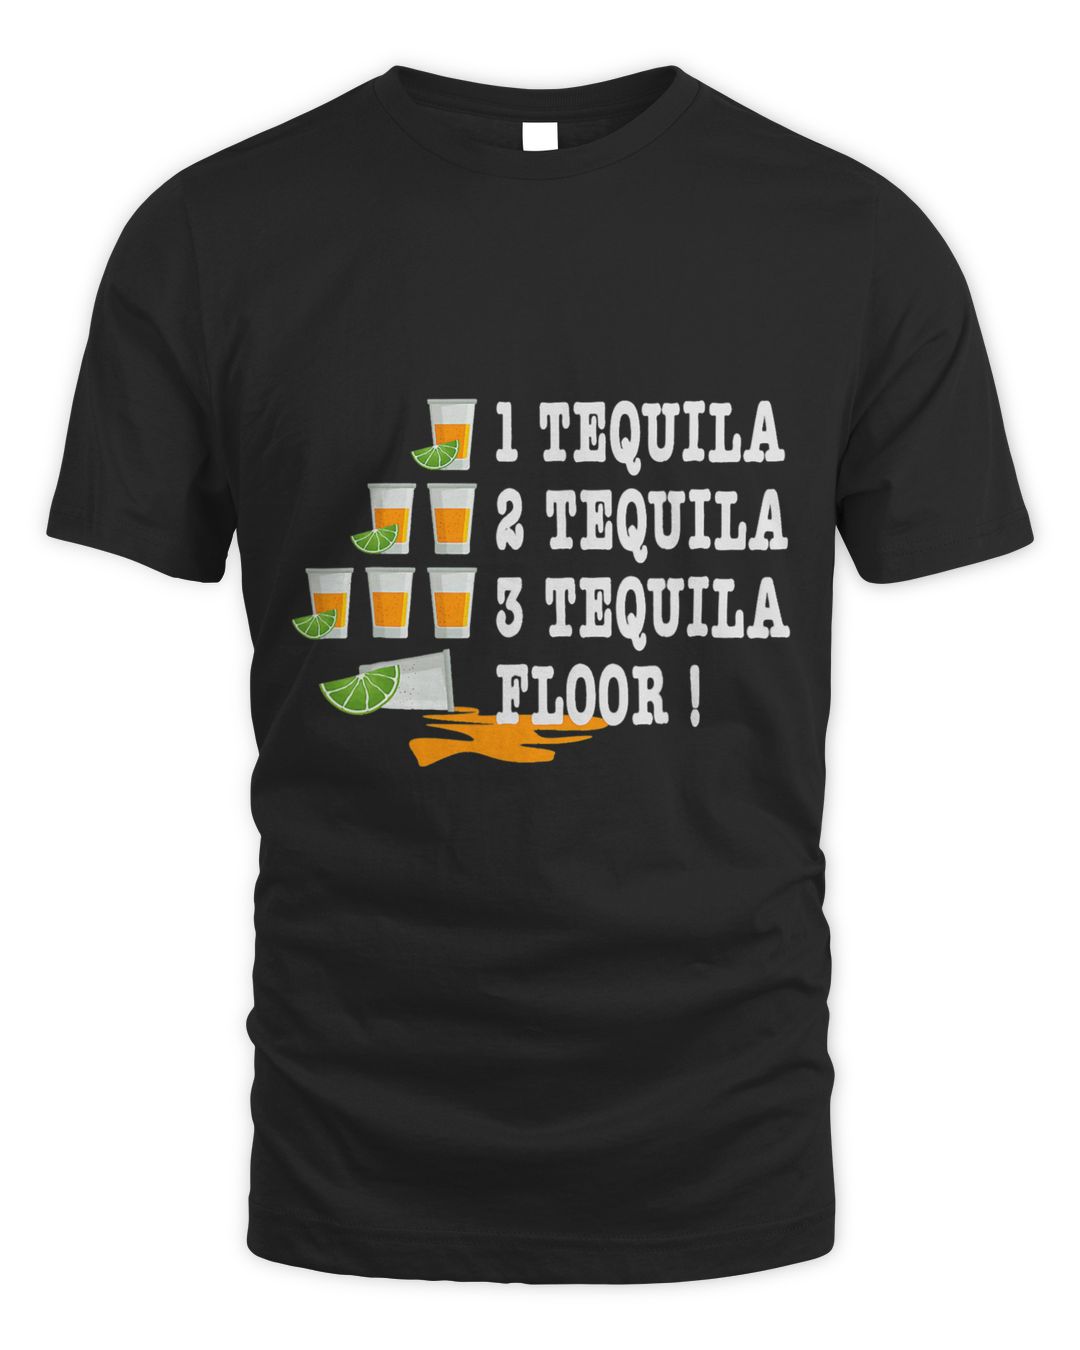 1 Tequila 2 Tequila 3 Tequila Floor Funny Party Drinking Layla Print